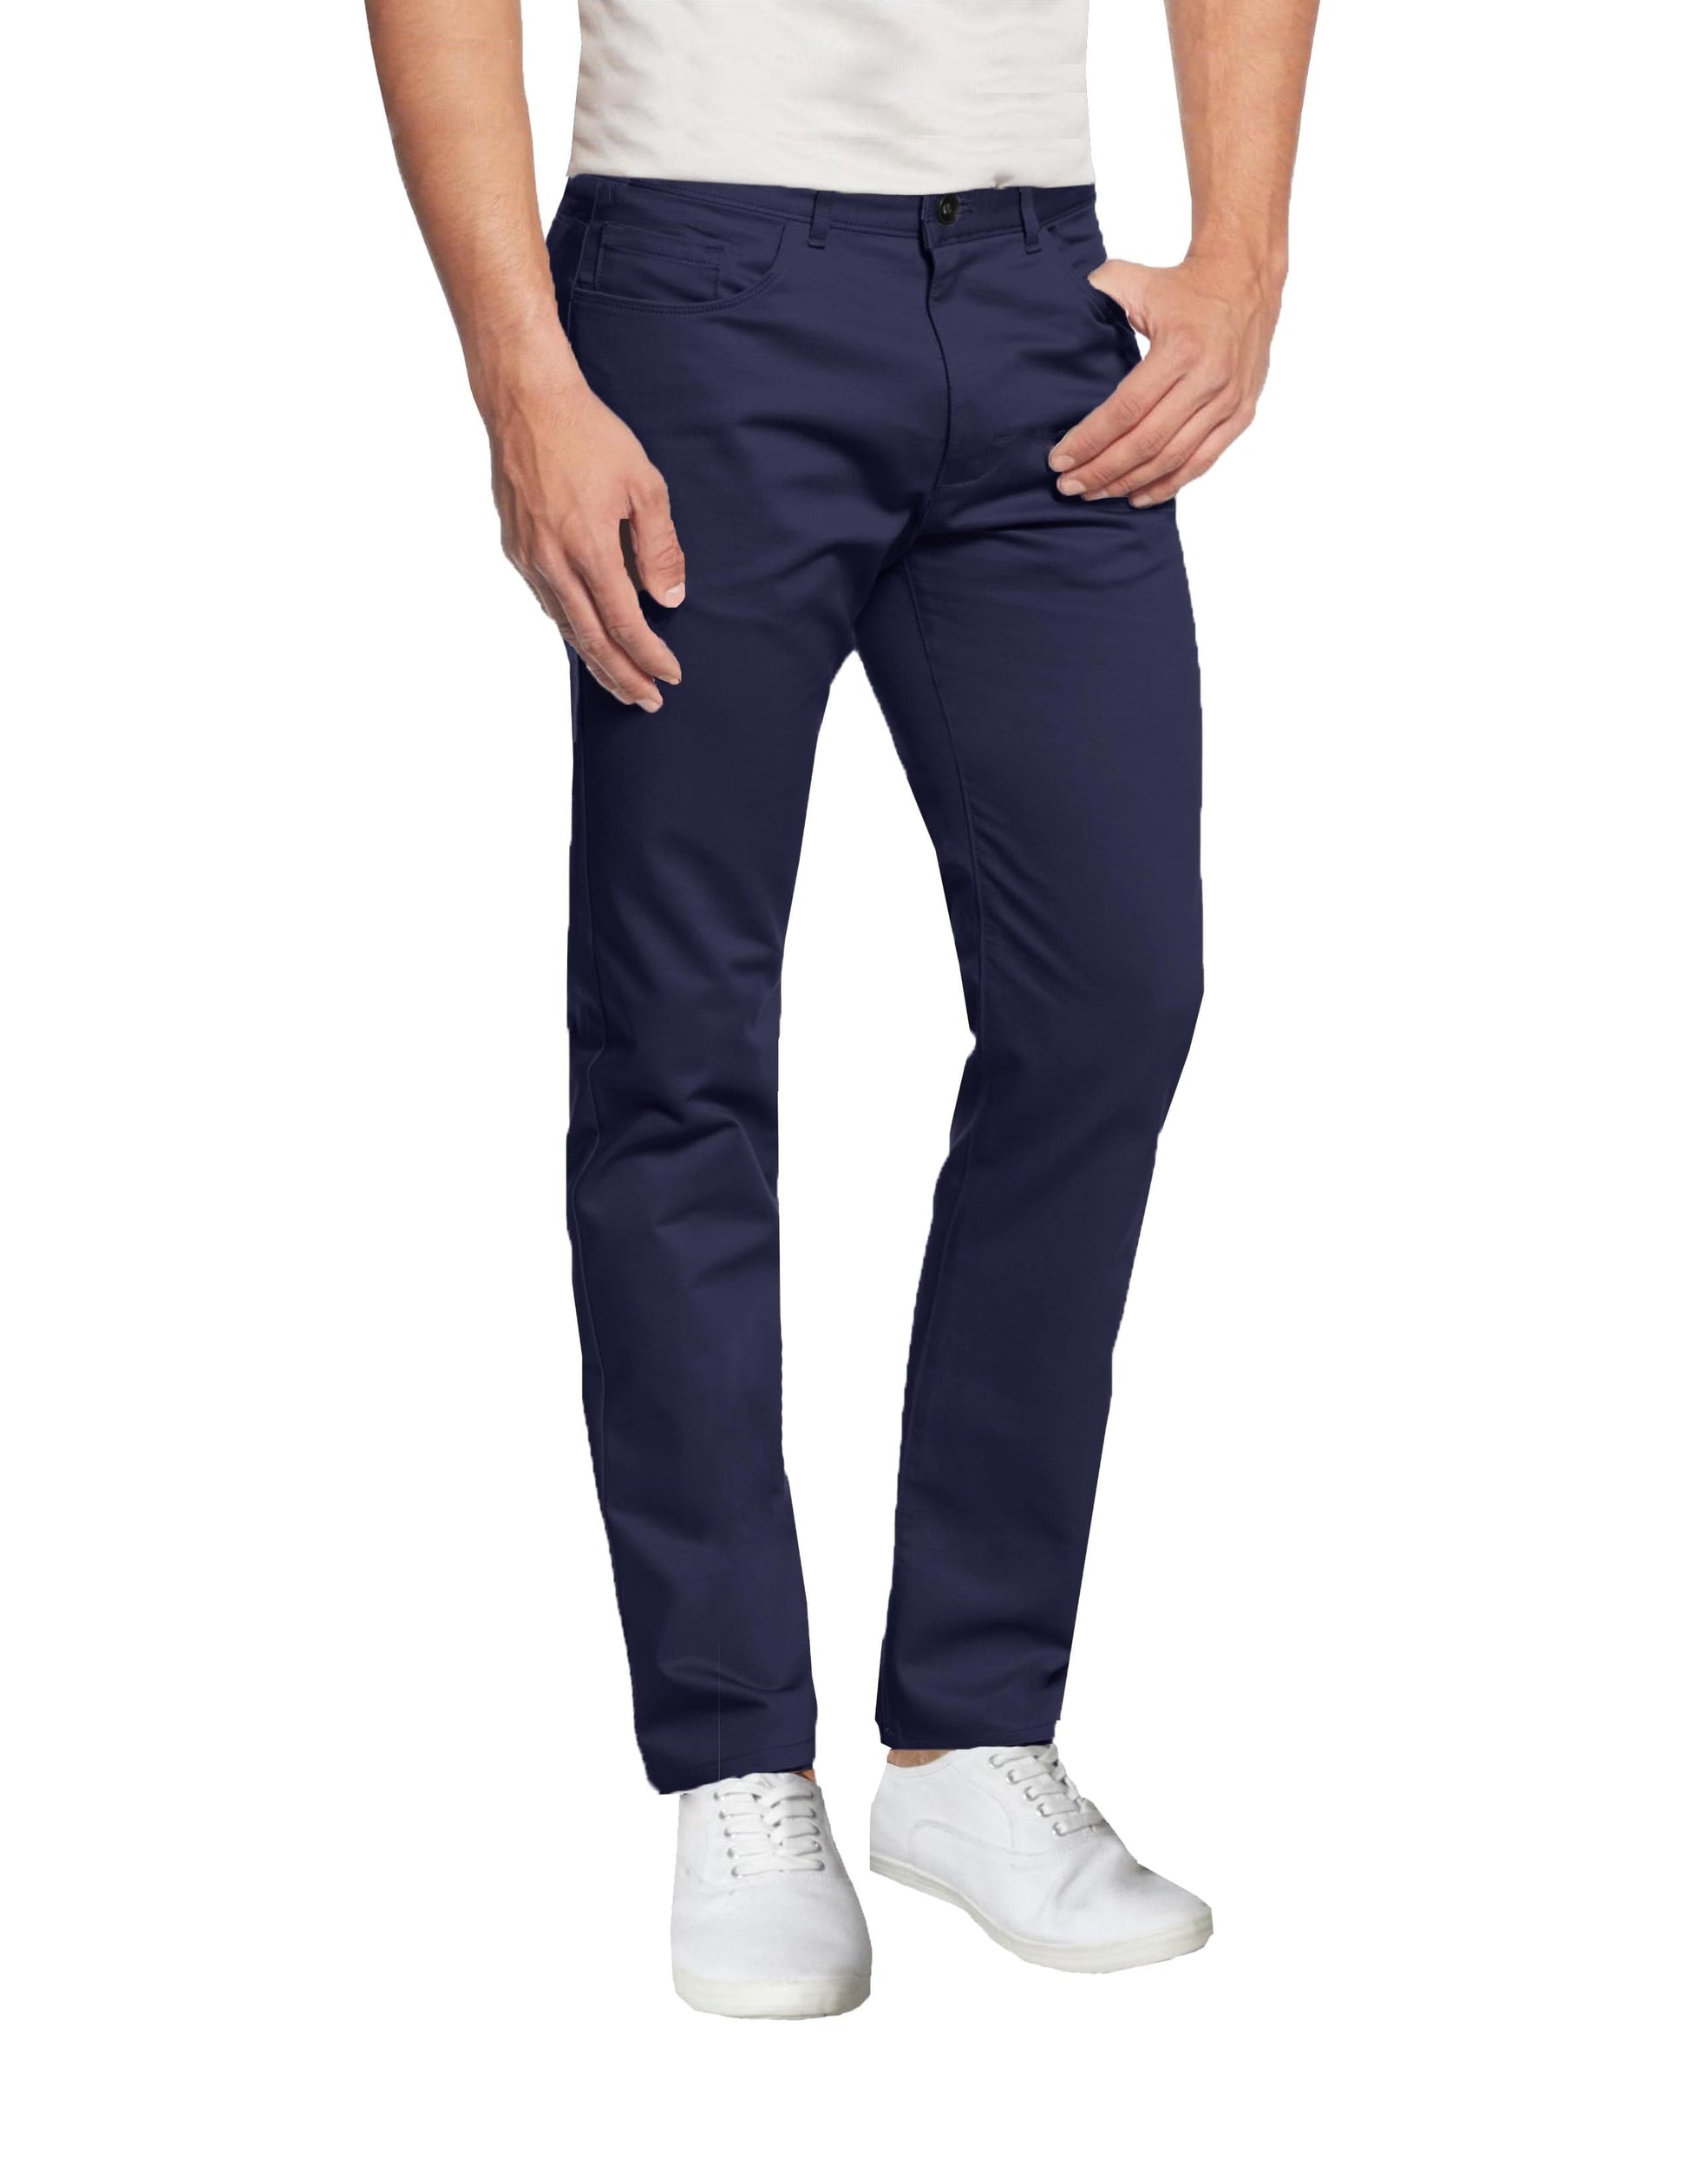 Men's Slim Fitting Cotton Stretch 5-Pocket Chino Pants (Sizes, 30-42) - GalaxybyHarvic